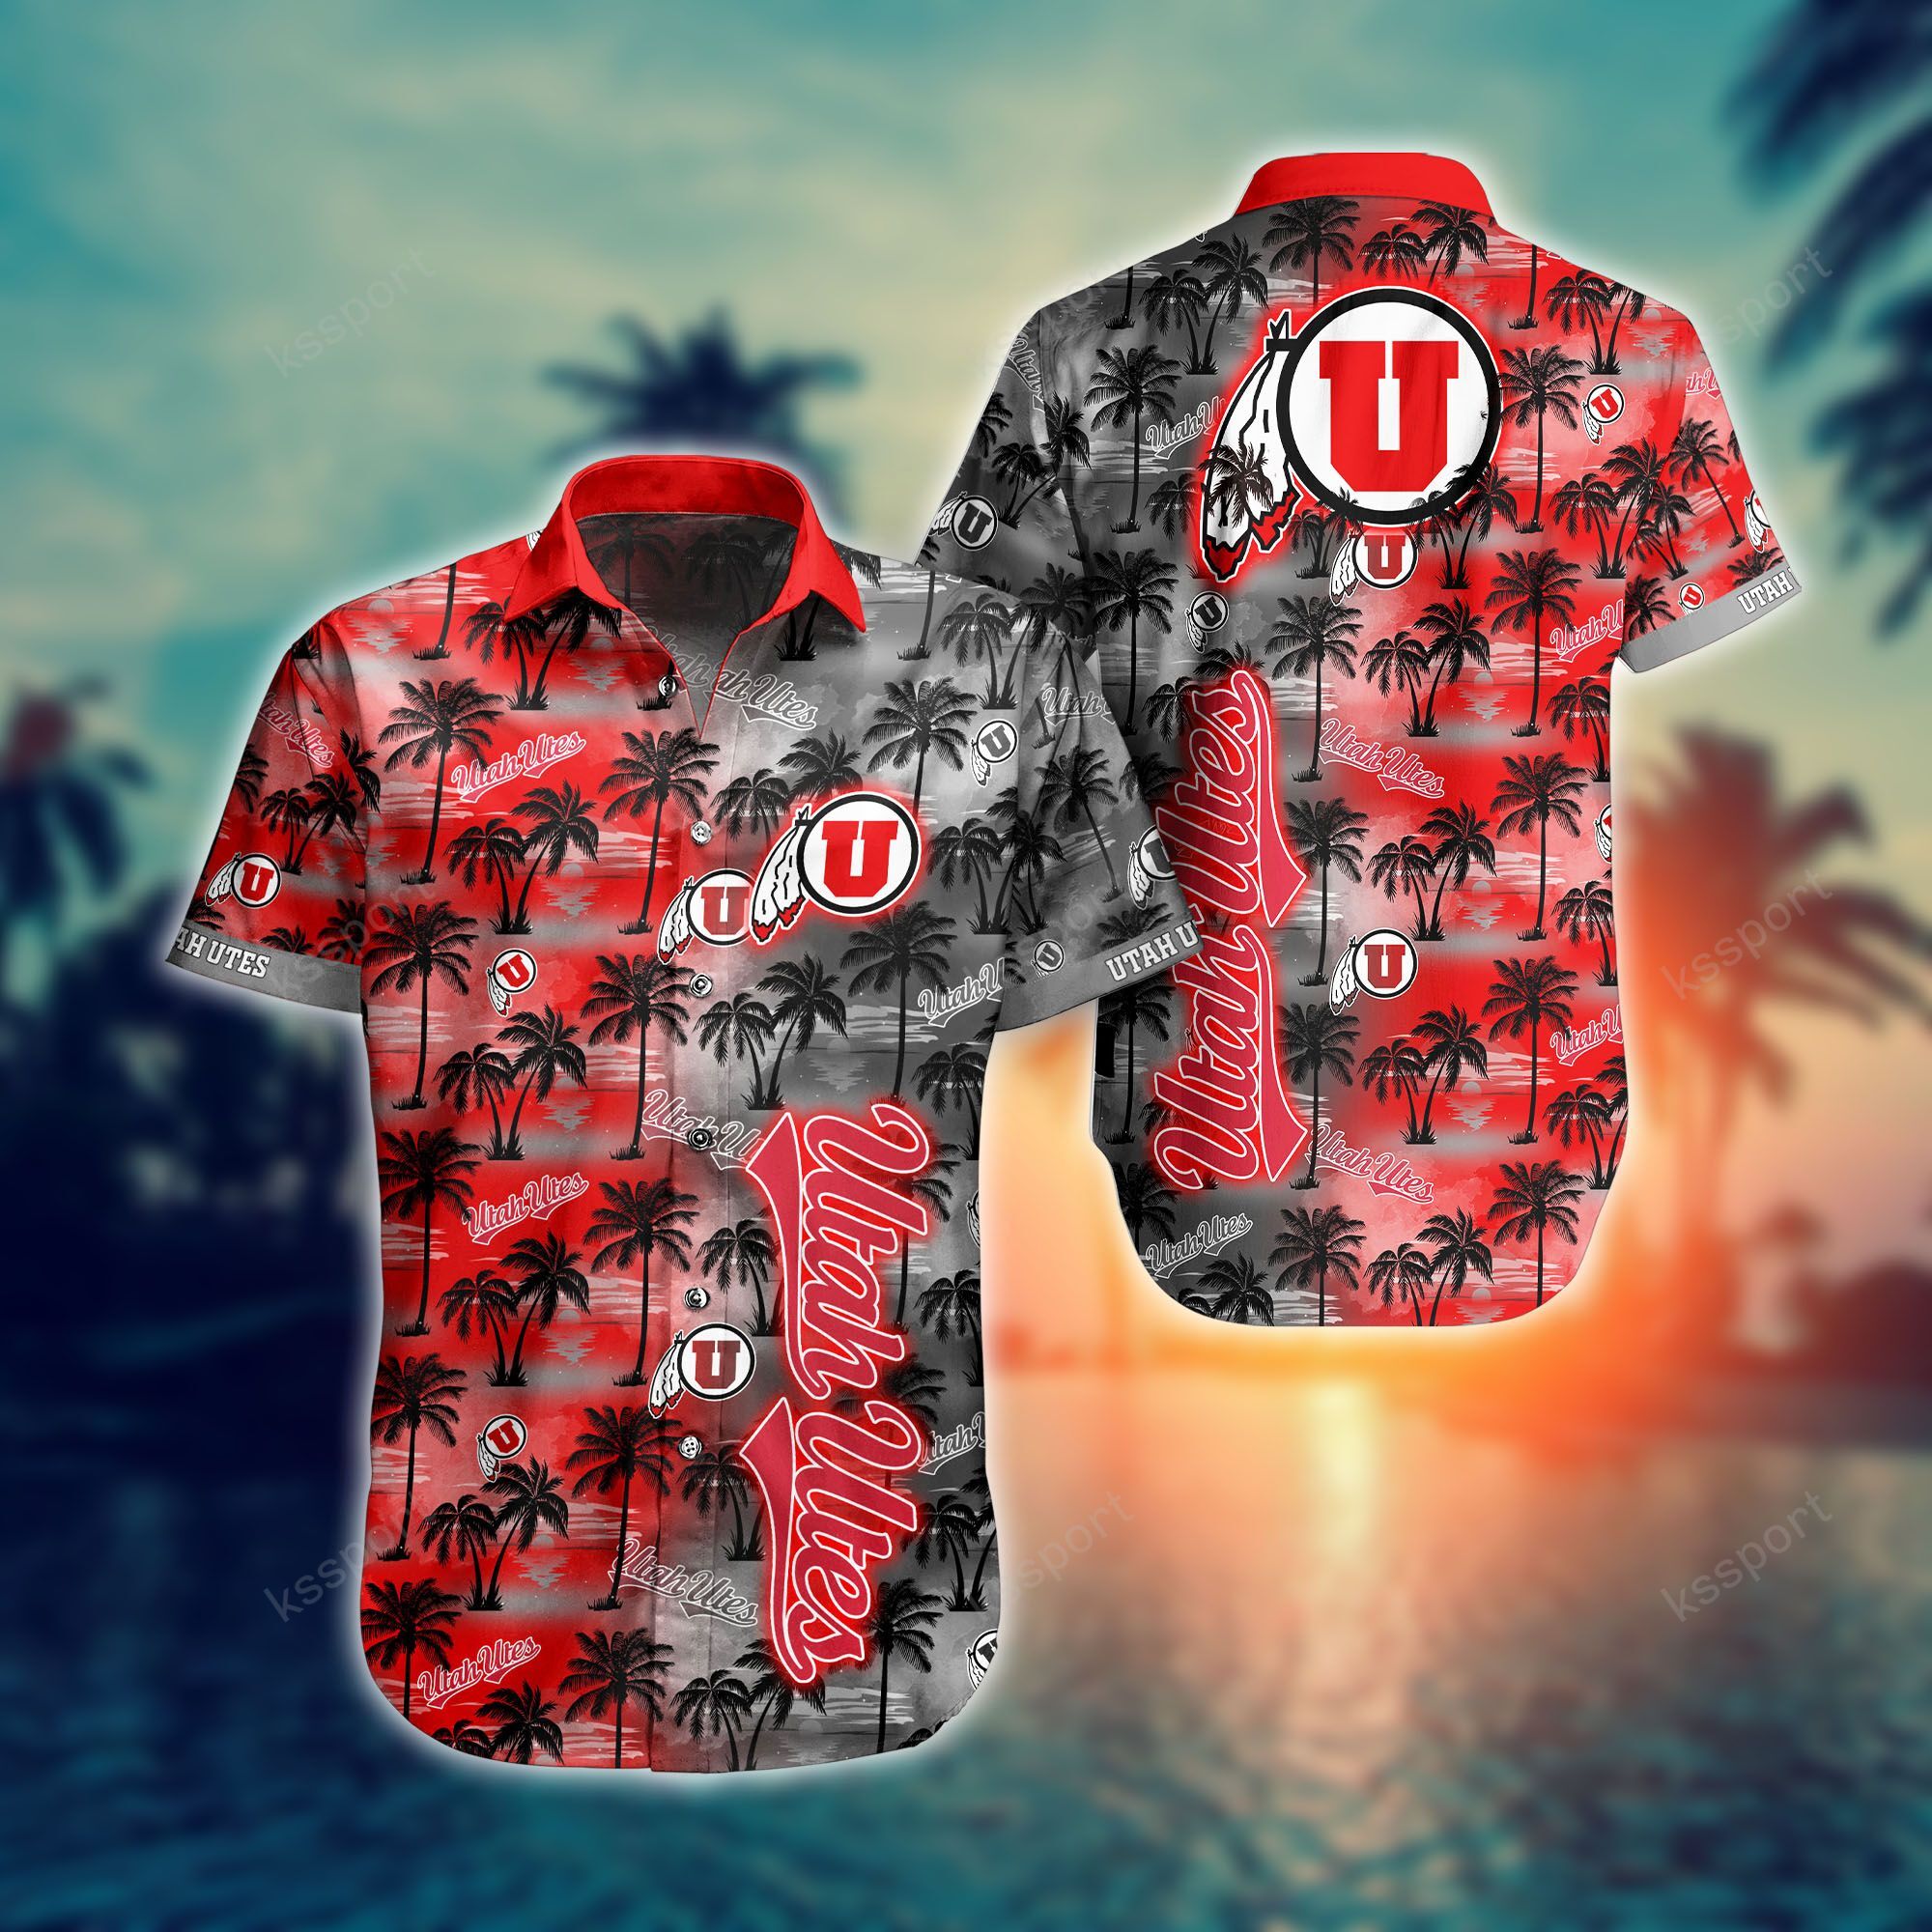 Treat yourself to a cool Hawaiian set today! 70